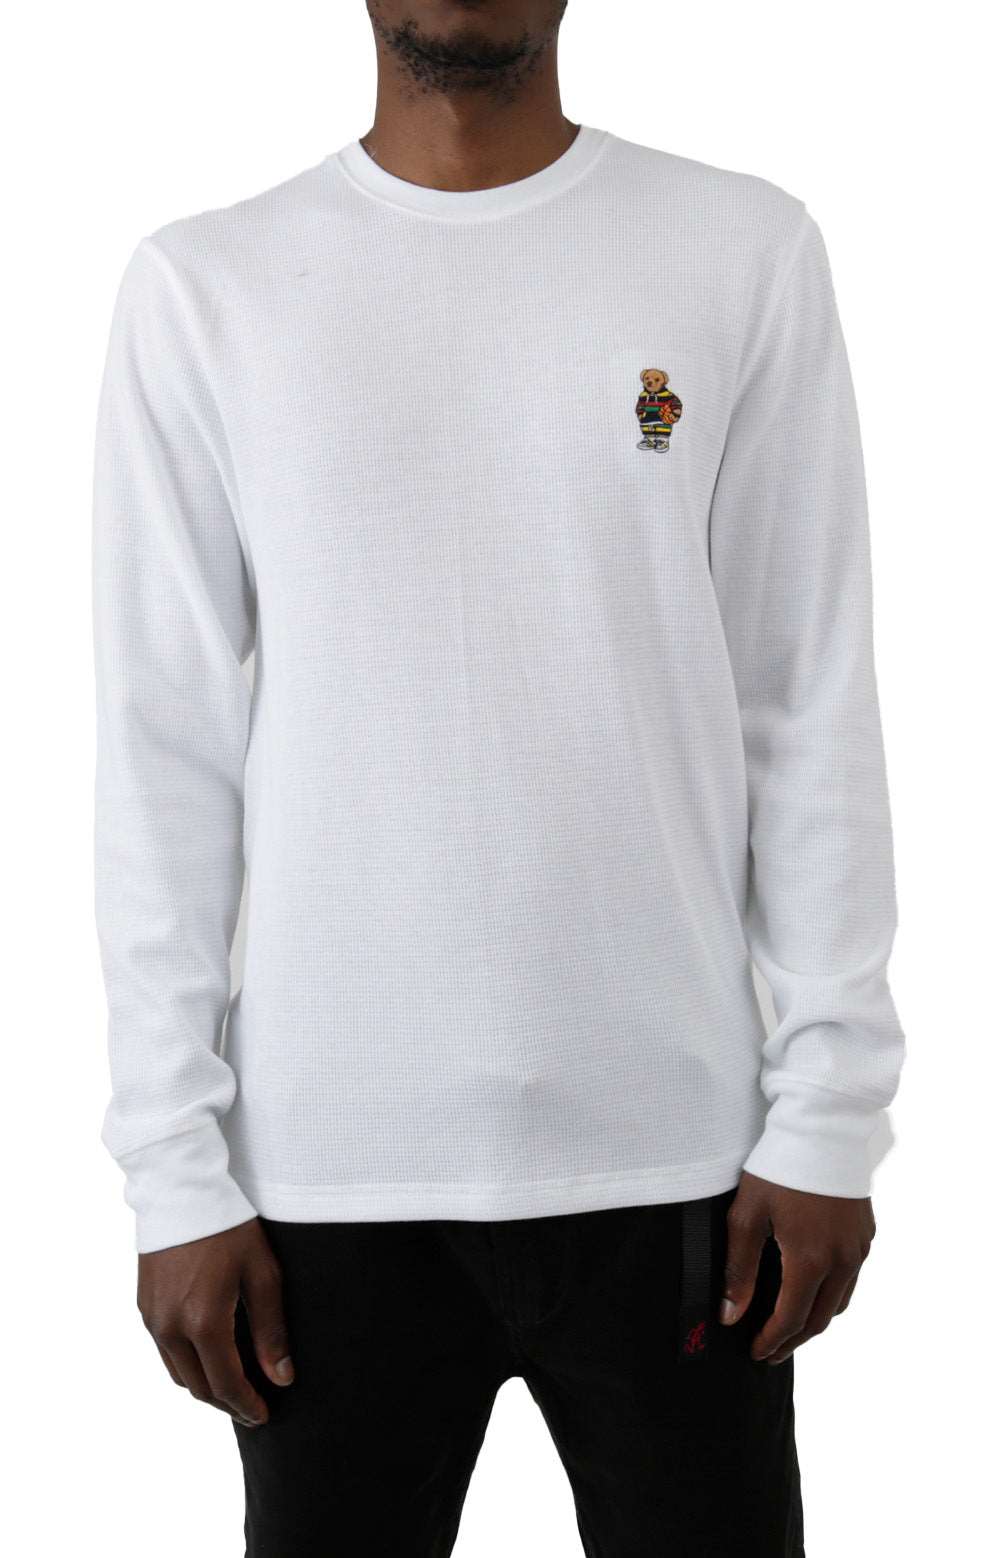 L/S Crew w/ Embroidery - White/Active Bear